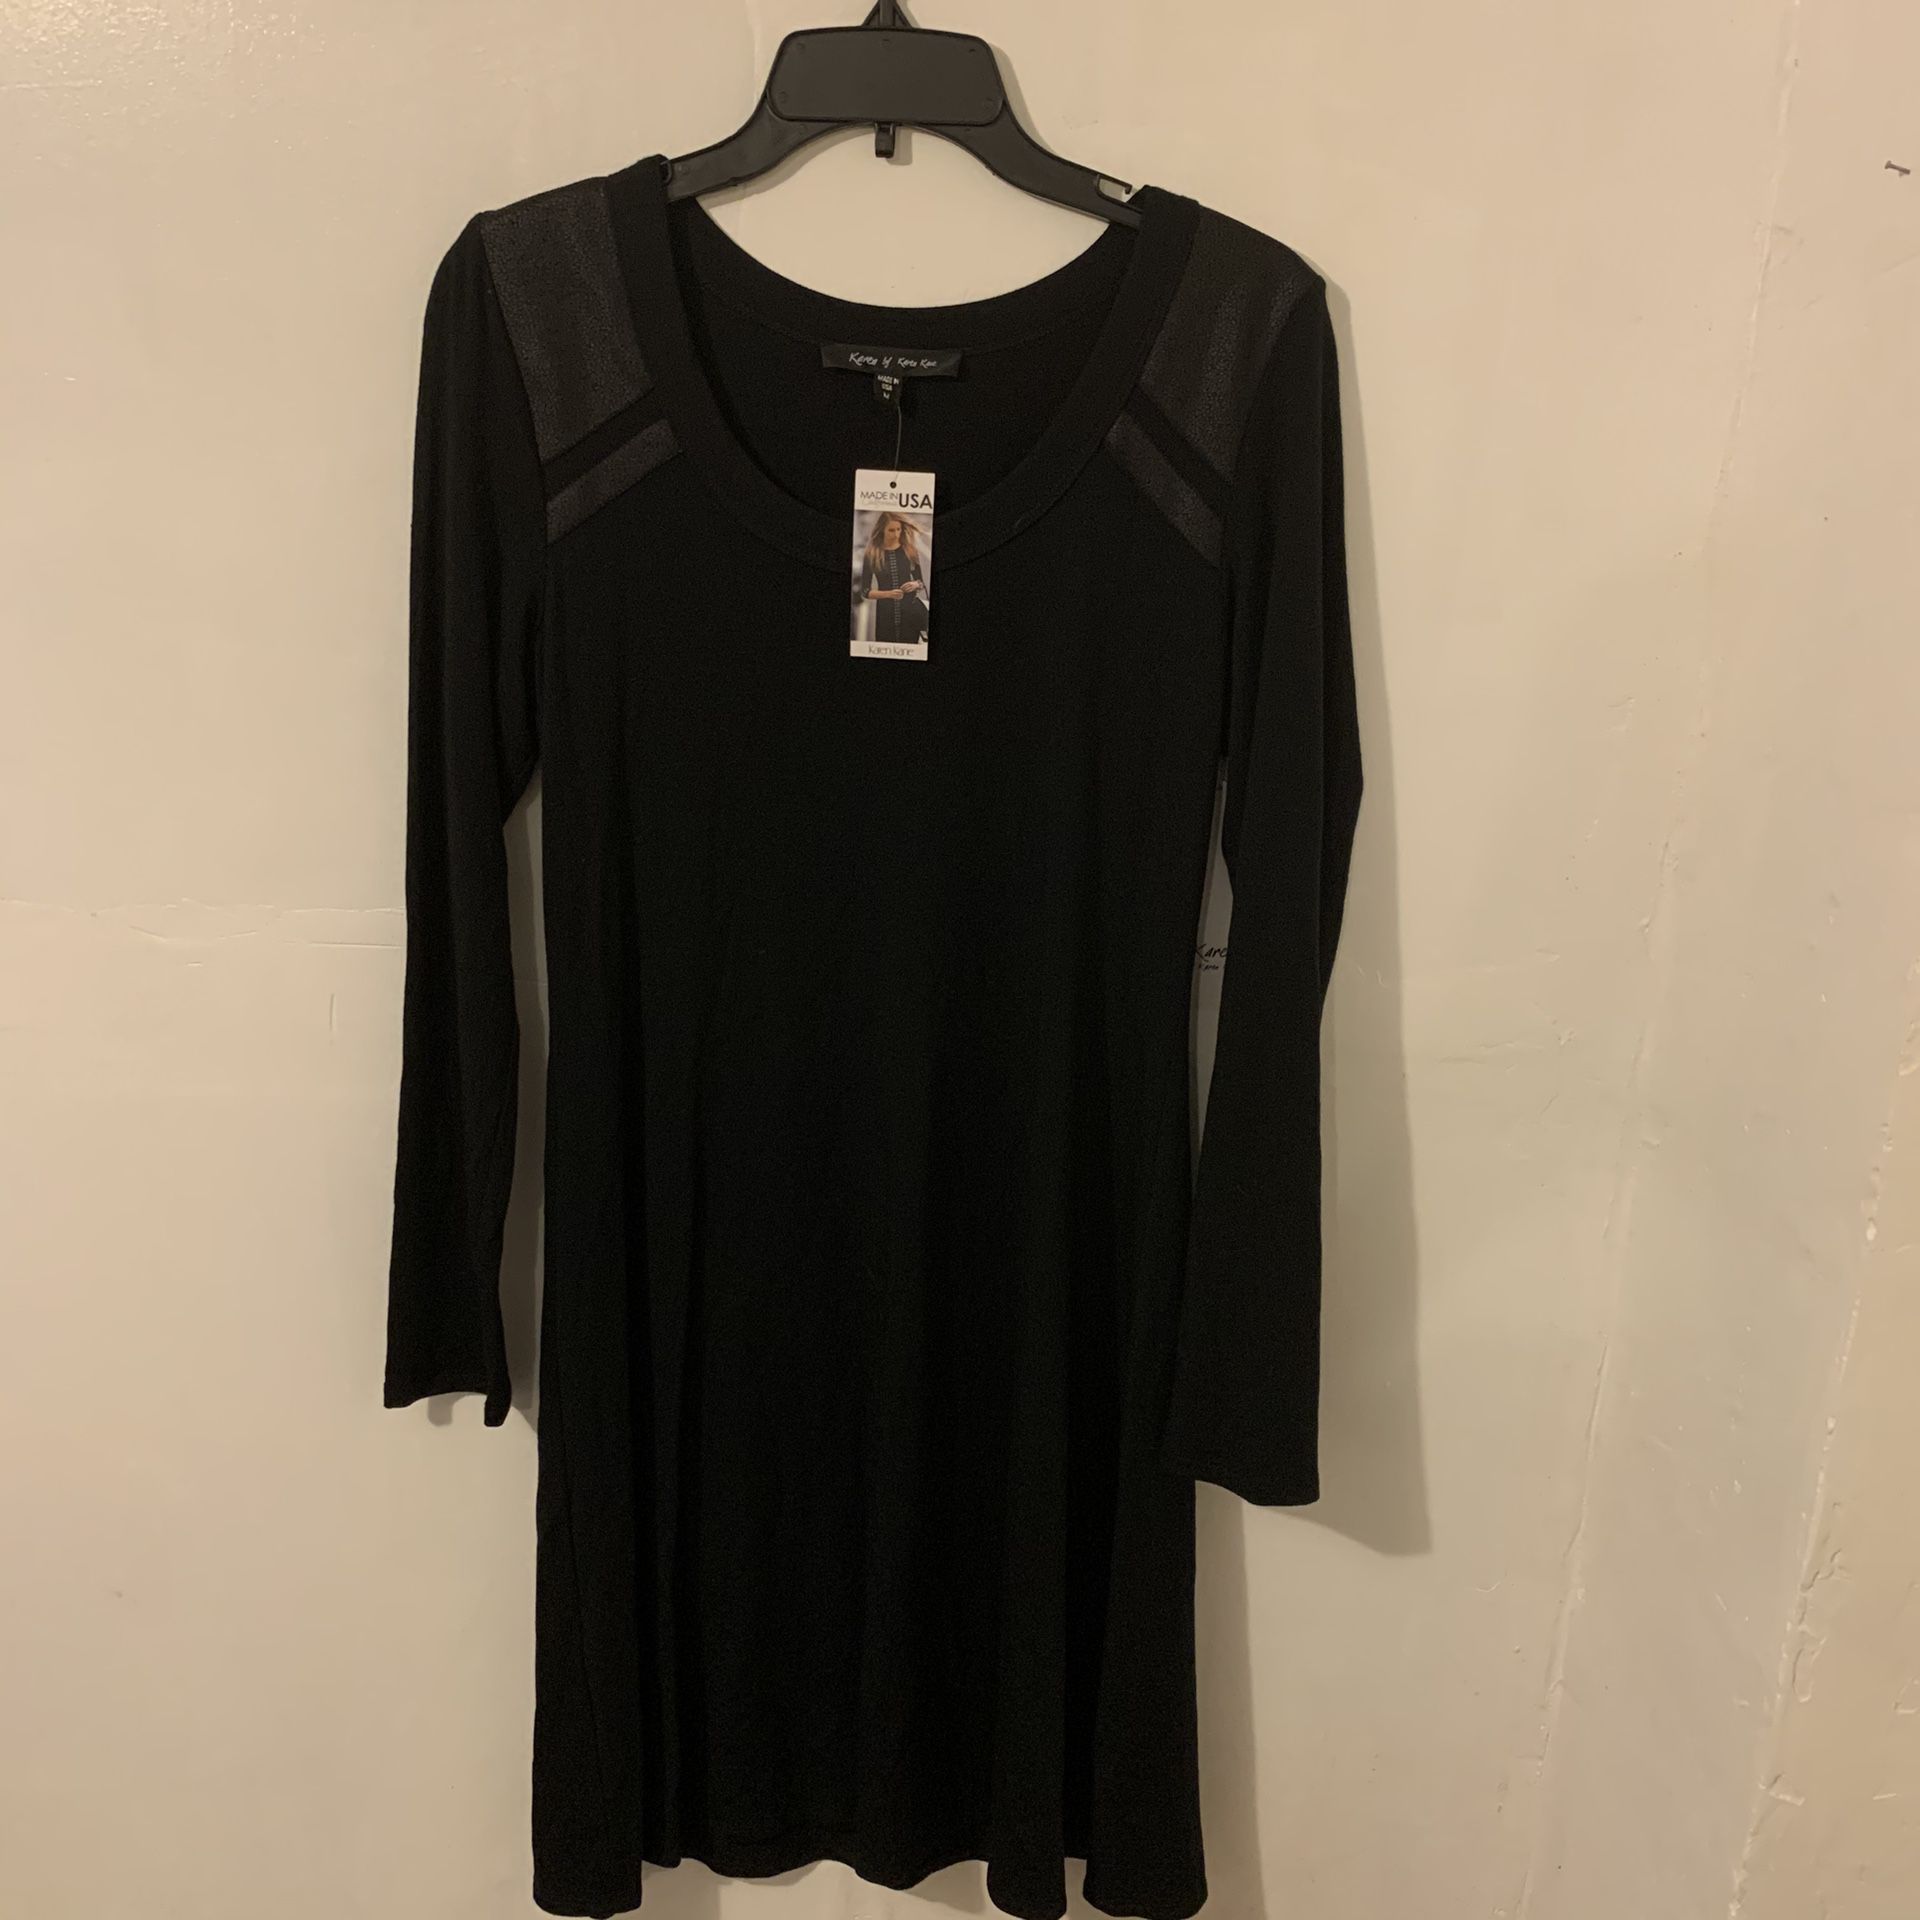 NEW Karen by Karen Kane A-Line Black Dress Women’s Size Medium - Royal Treatment II - Brand New with Tags - Retails for $109.00 - Made in USA Califor